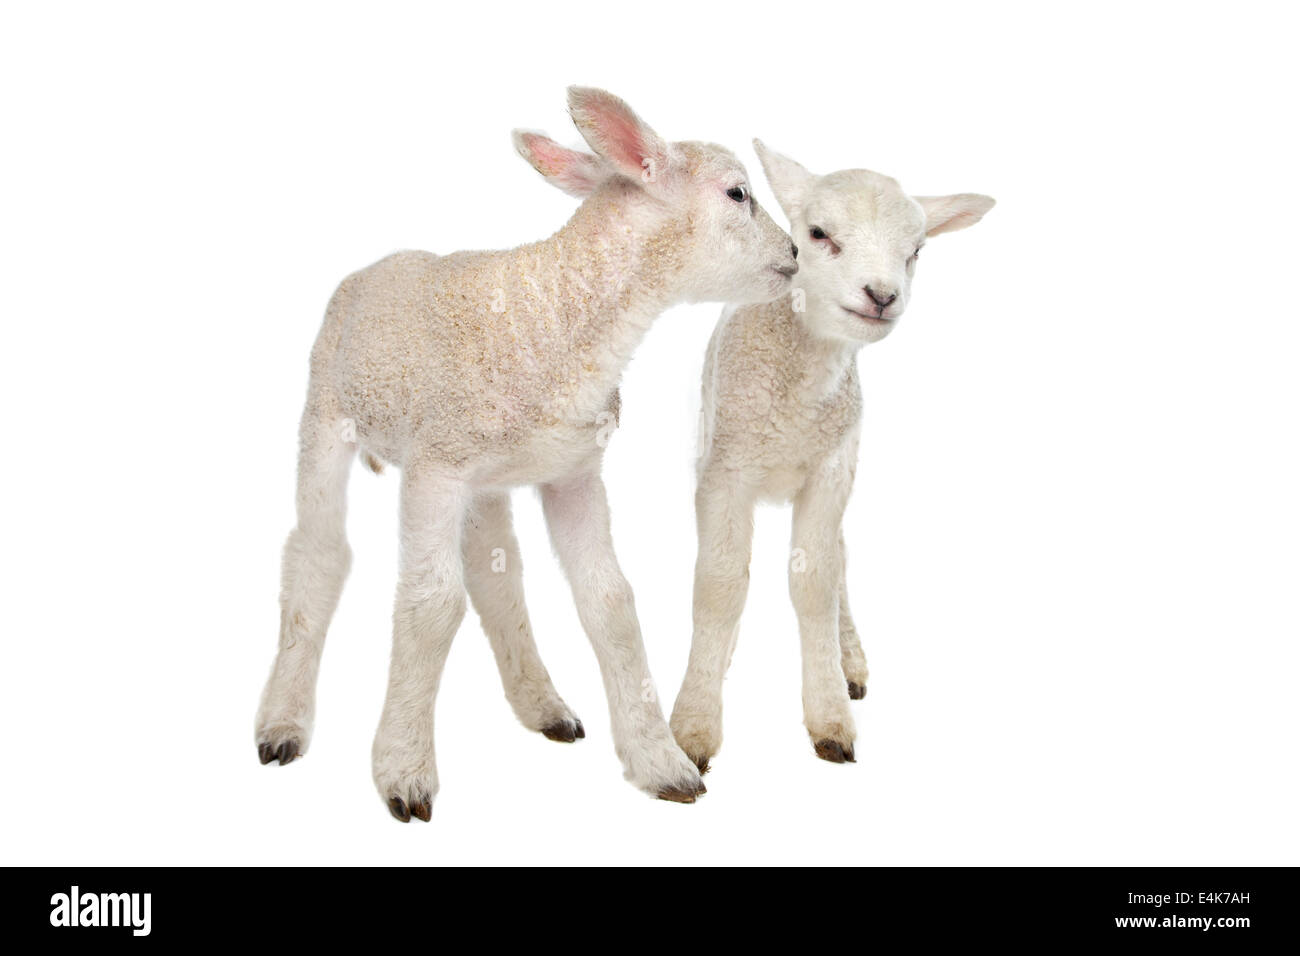 Two little lambs Stock Photo